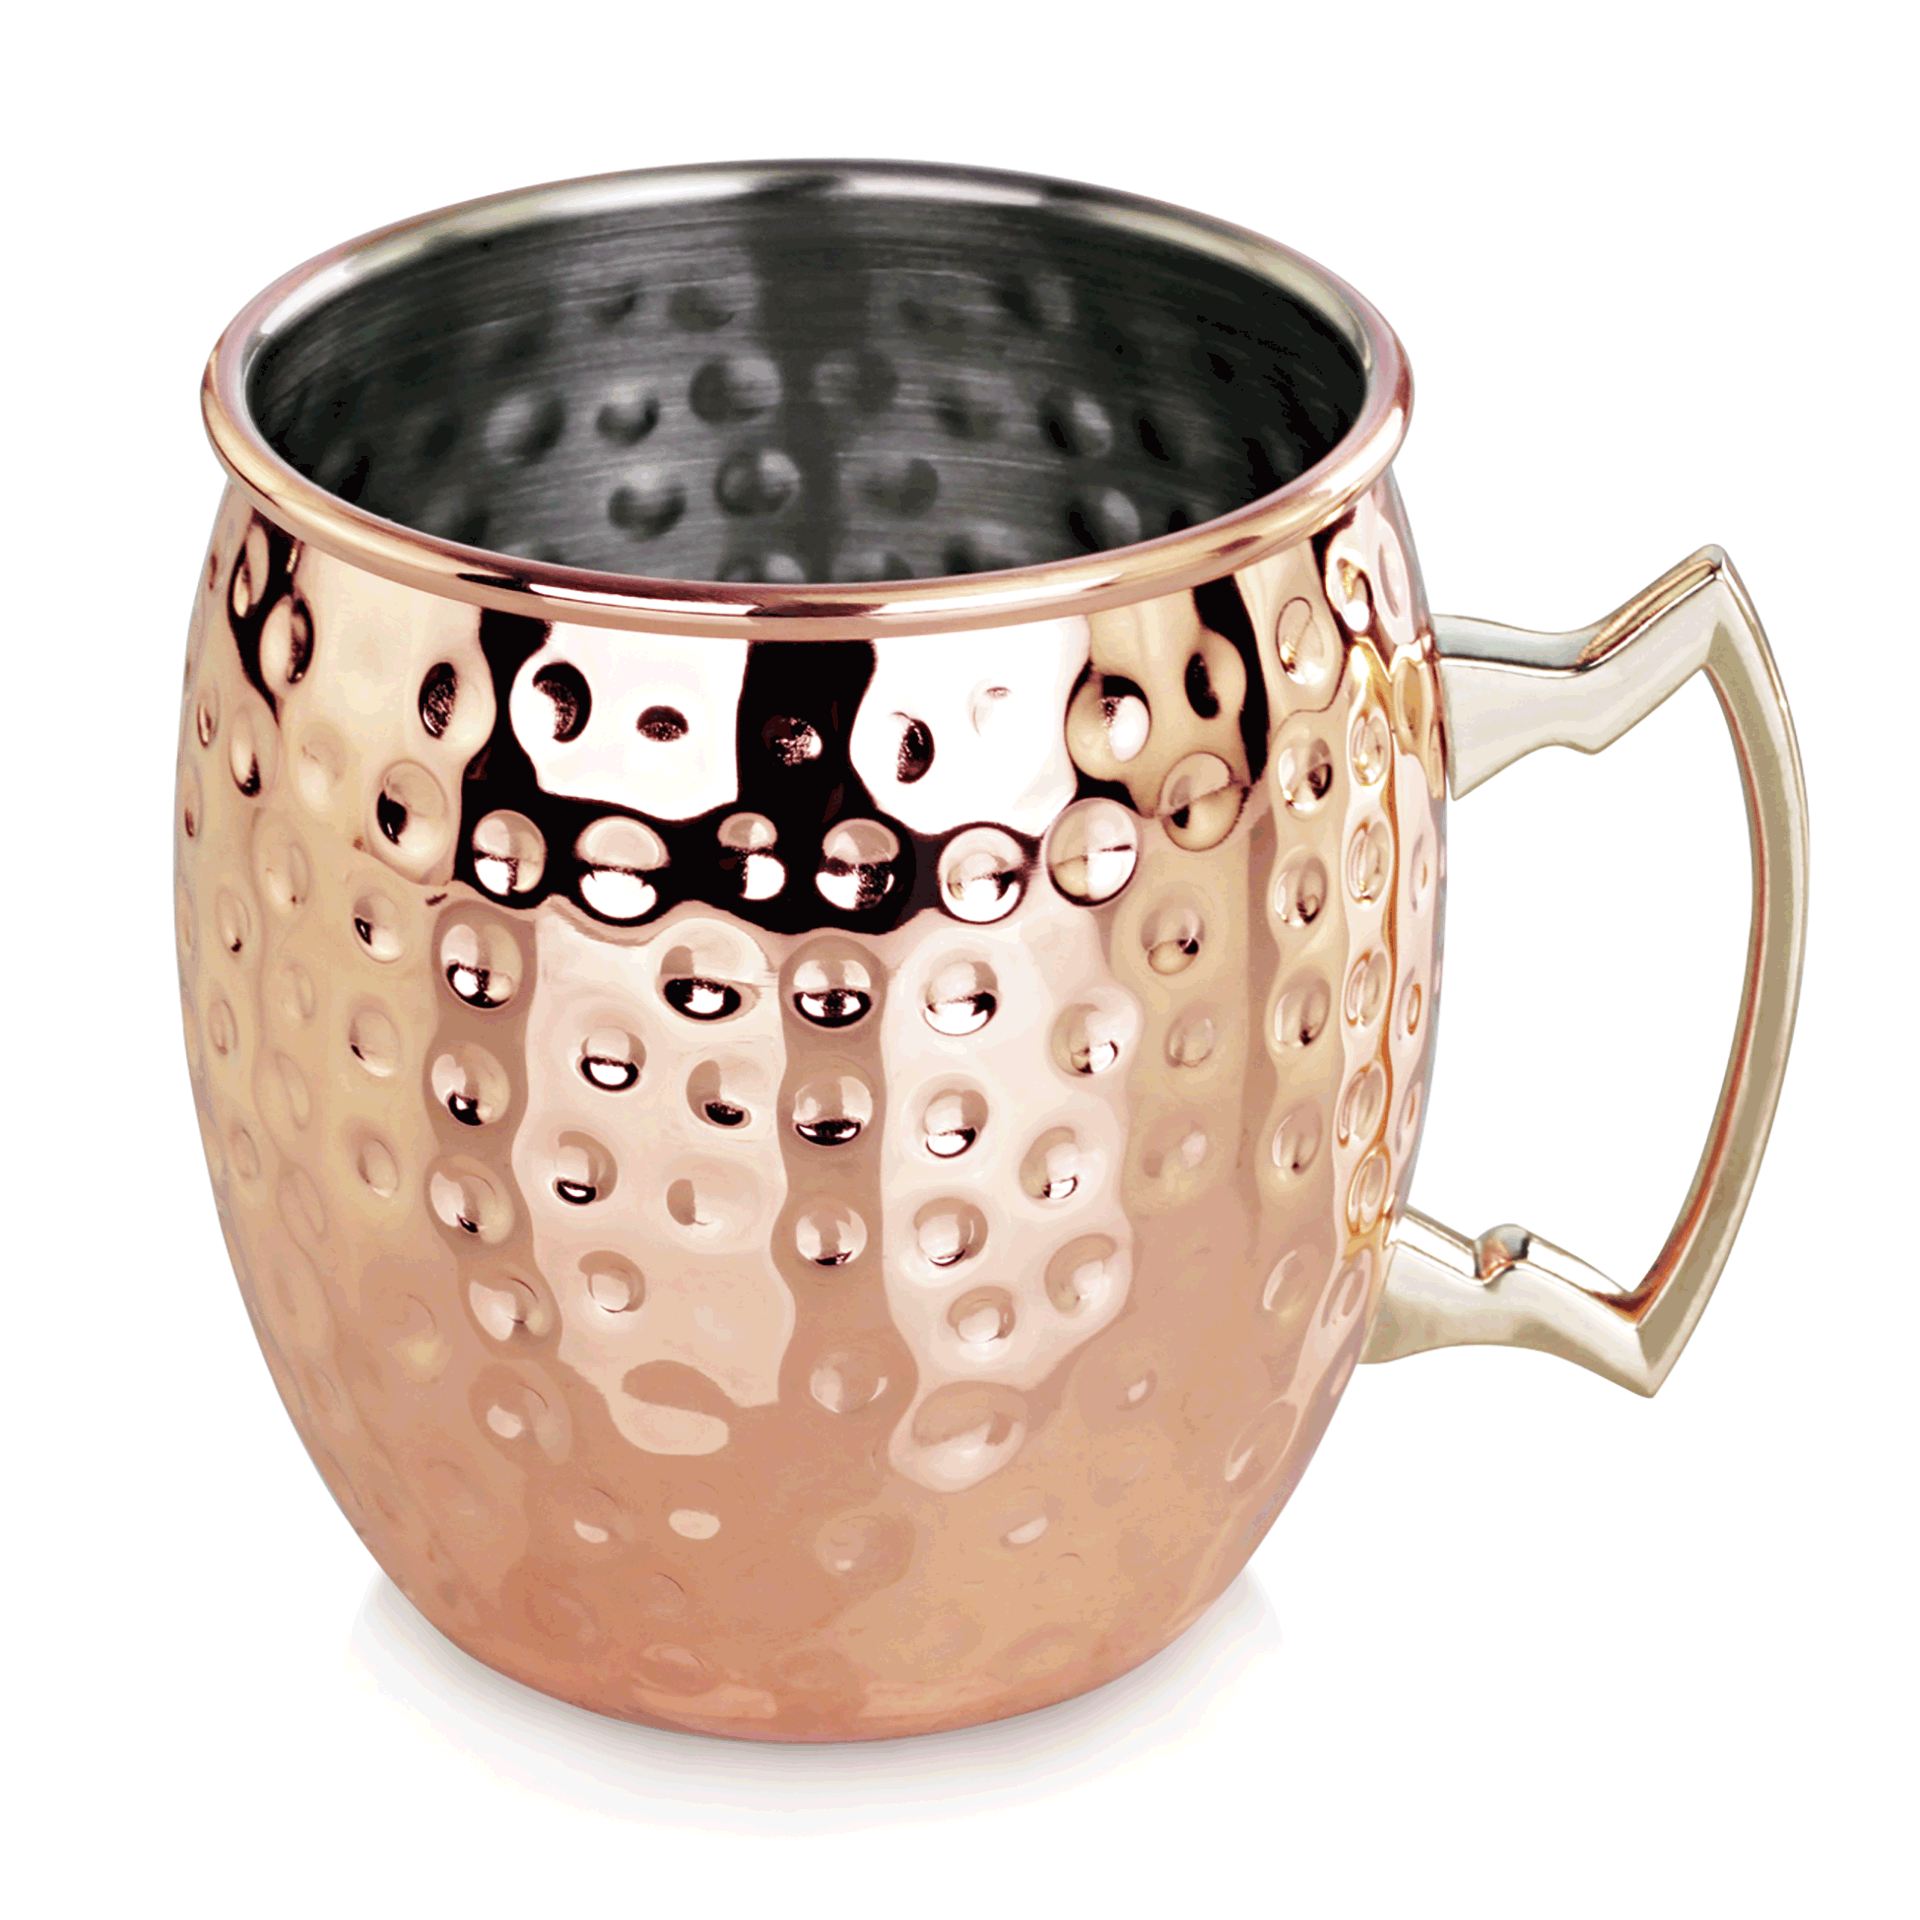 Hammered Moscow Mule Mug 50cl